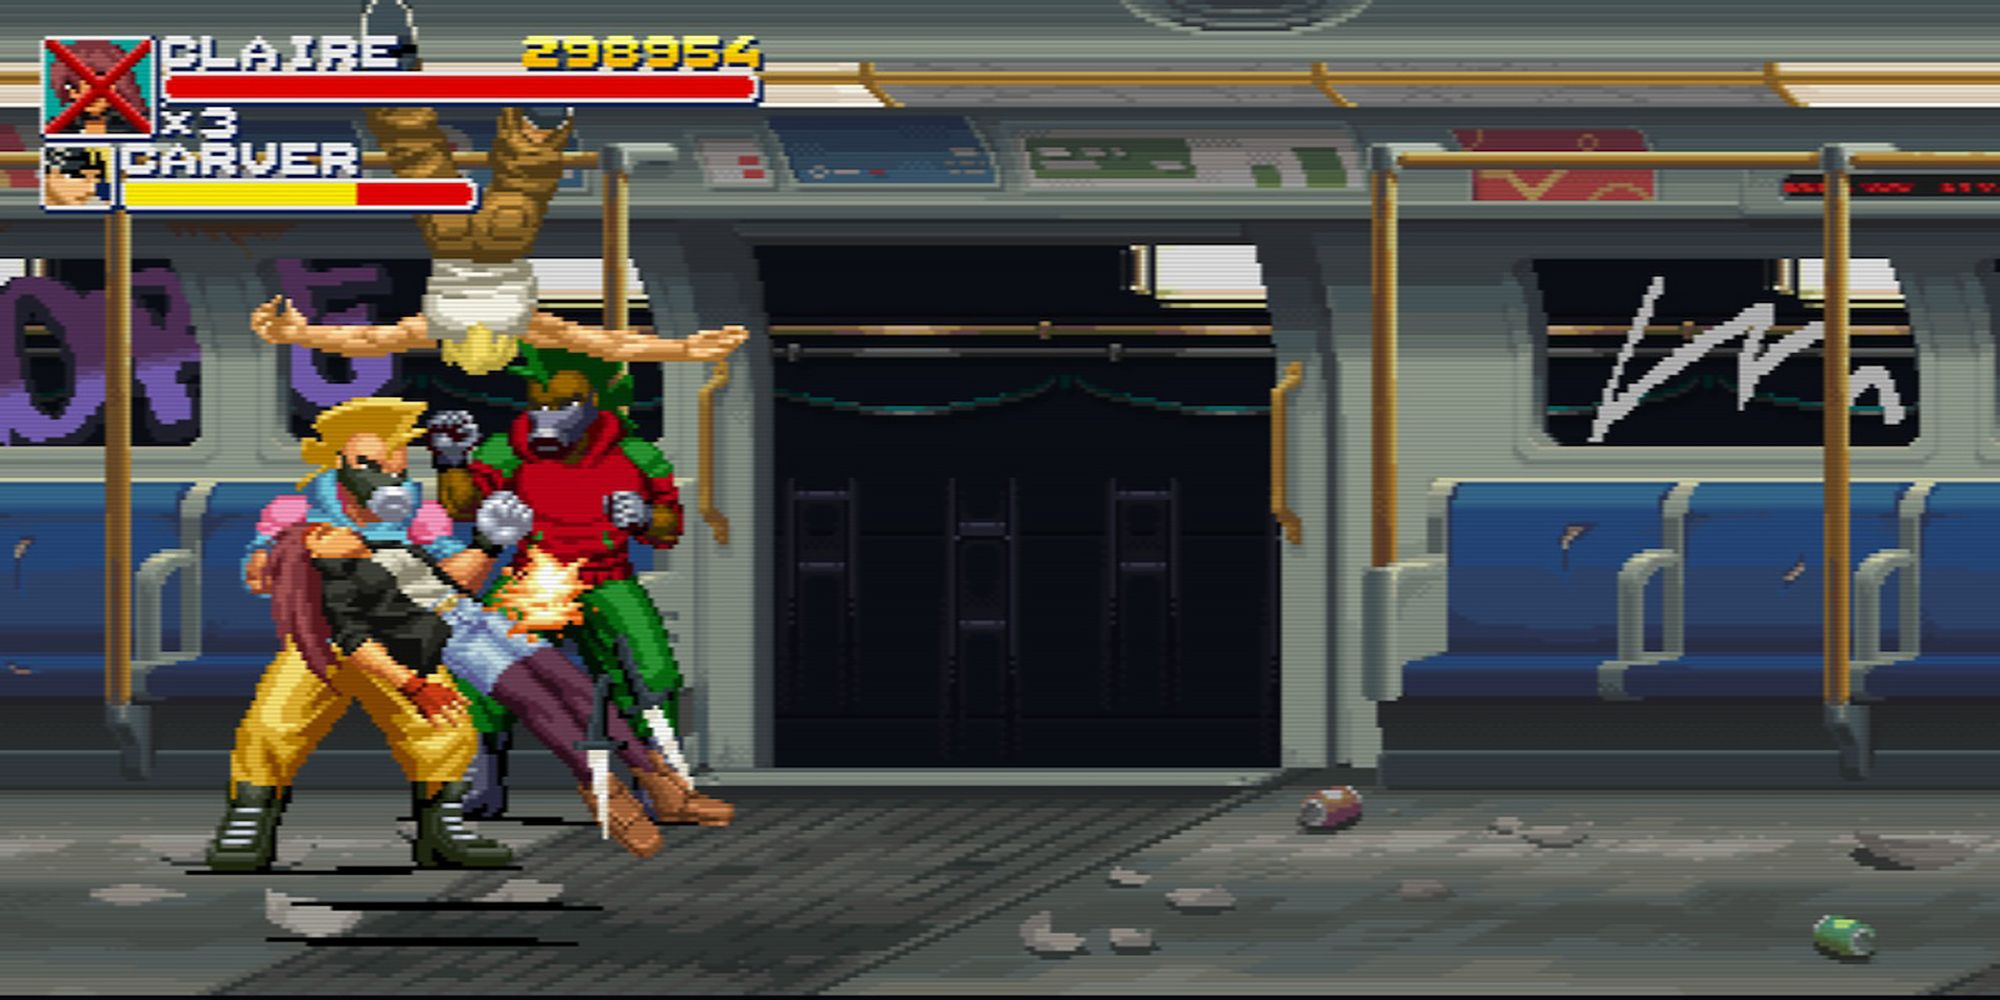 Claire Gets pummeled by opponents in a subway car in Final Vendetta.